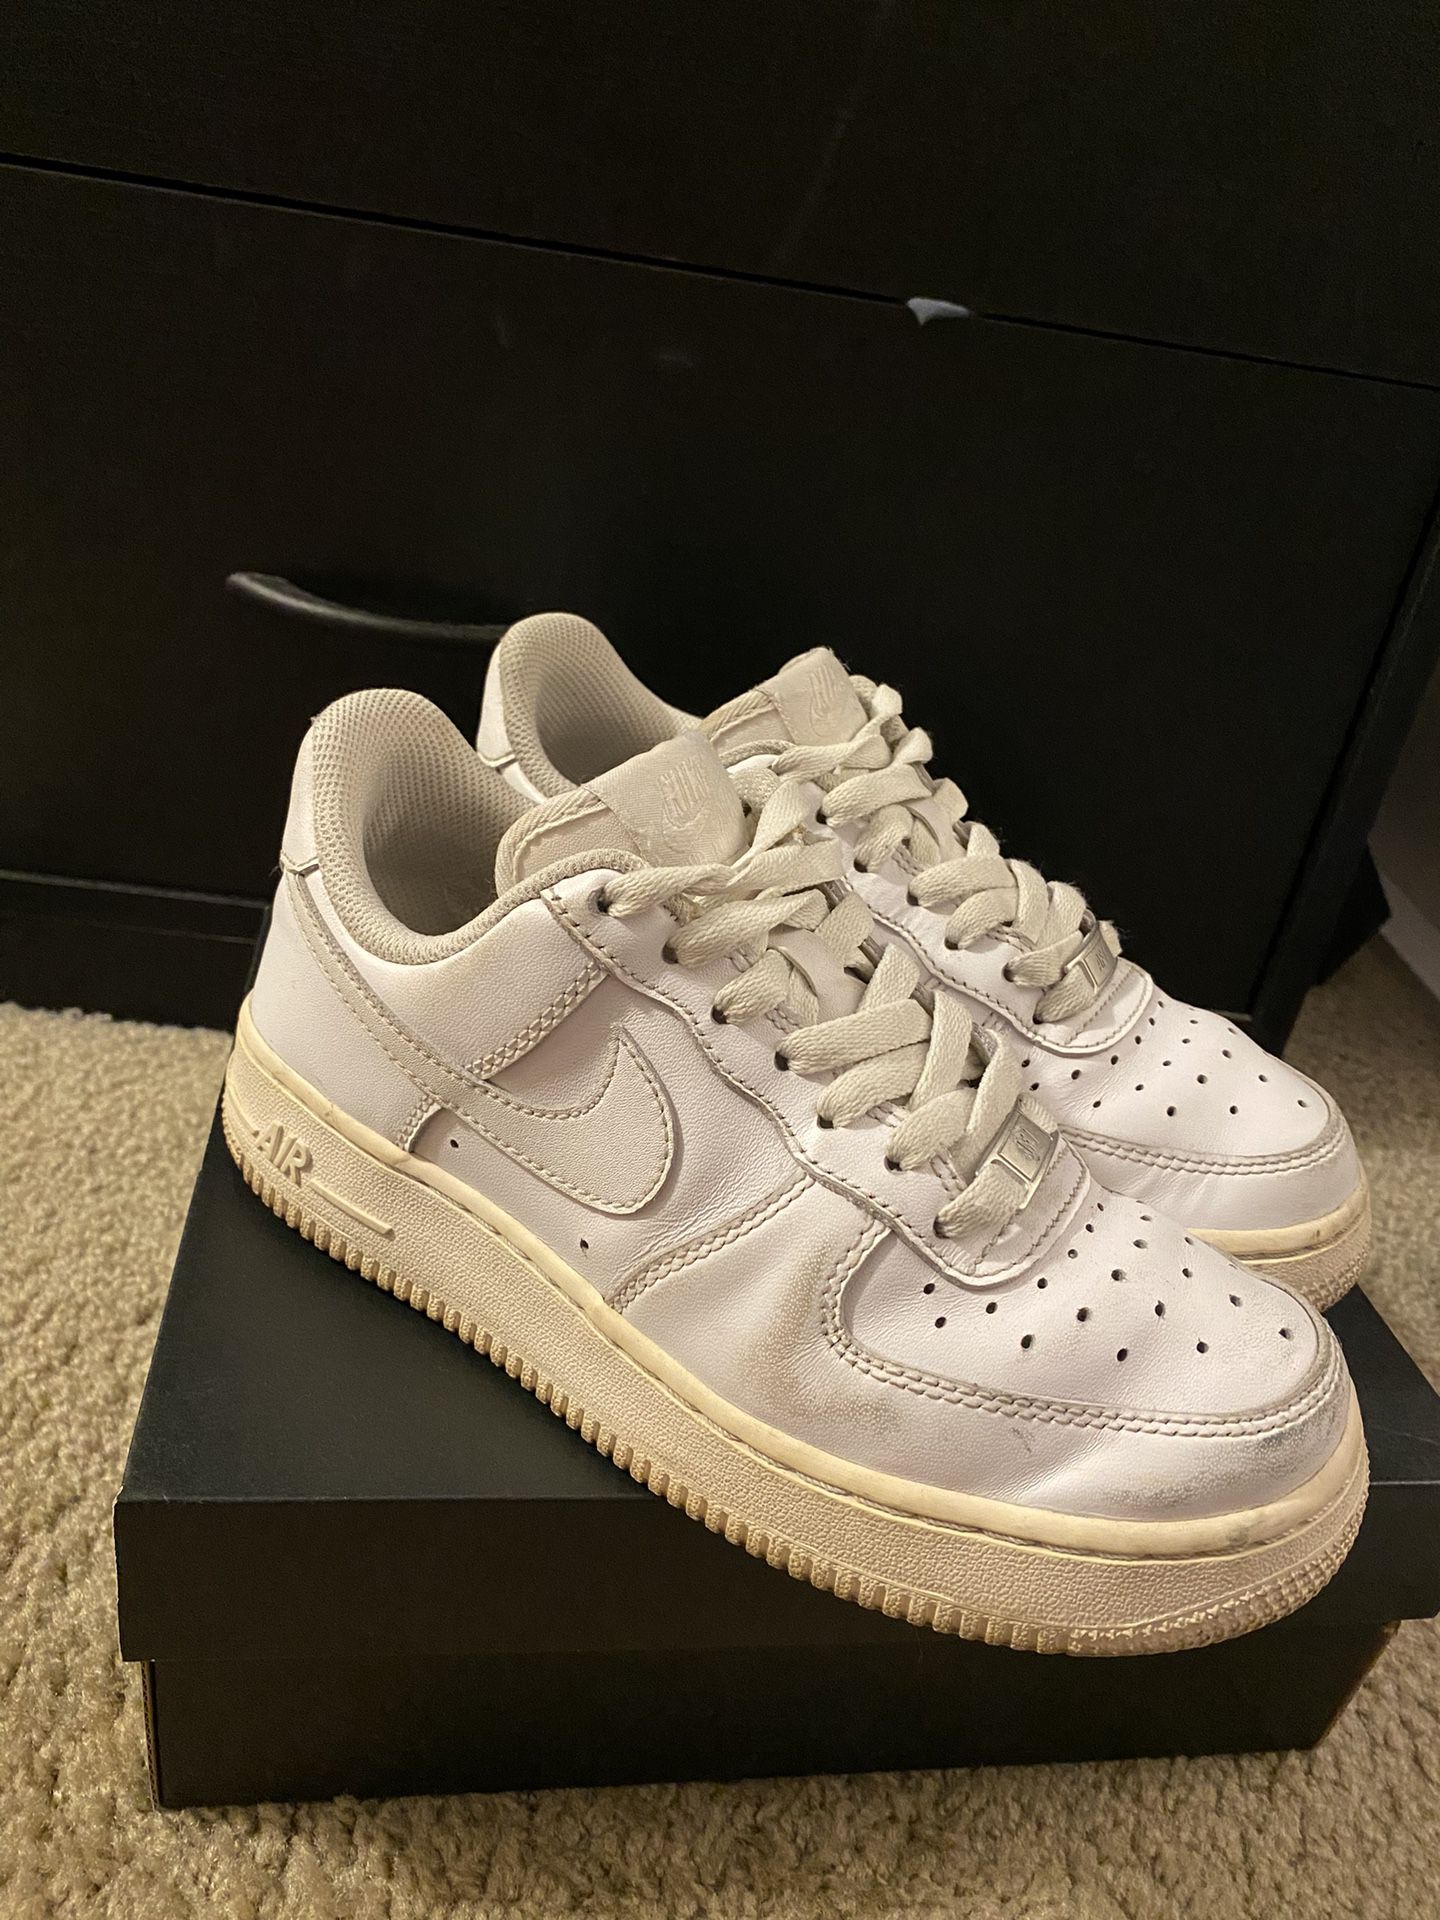 Off White Nike Air Force 1 “MOMA” size 11 for Sale in Los Angeles, CA -  OfferUp